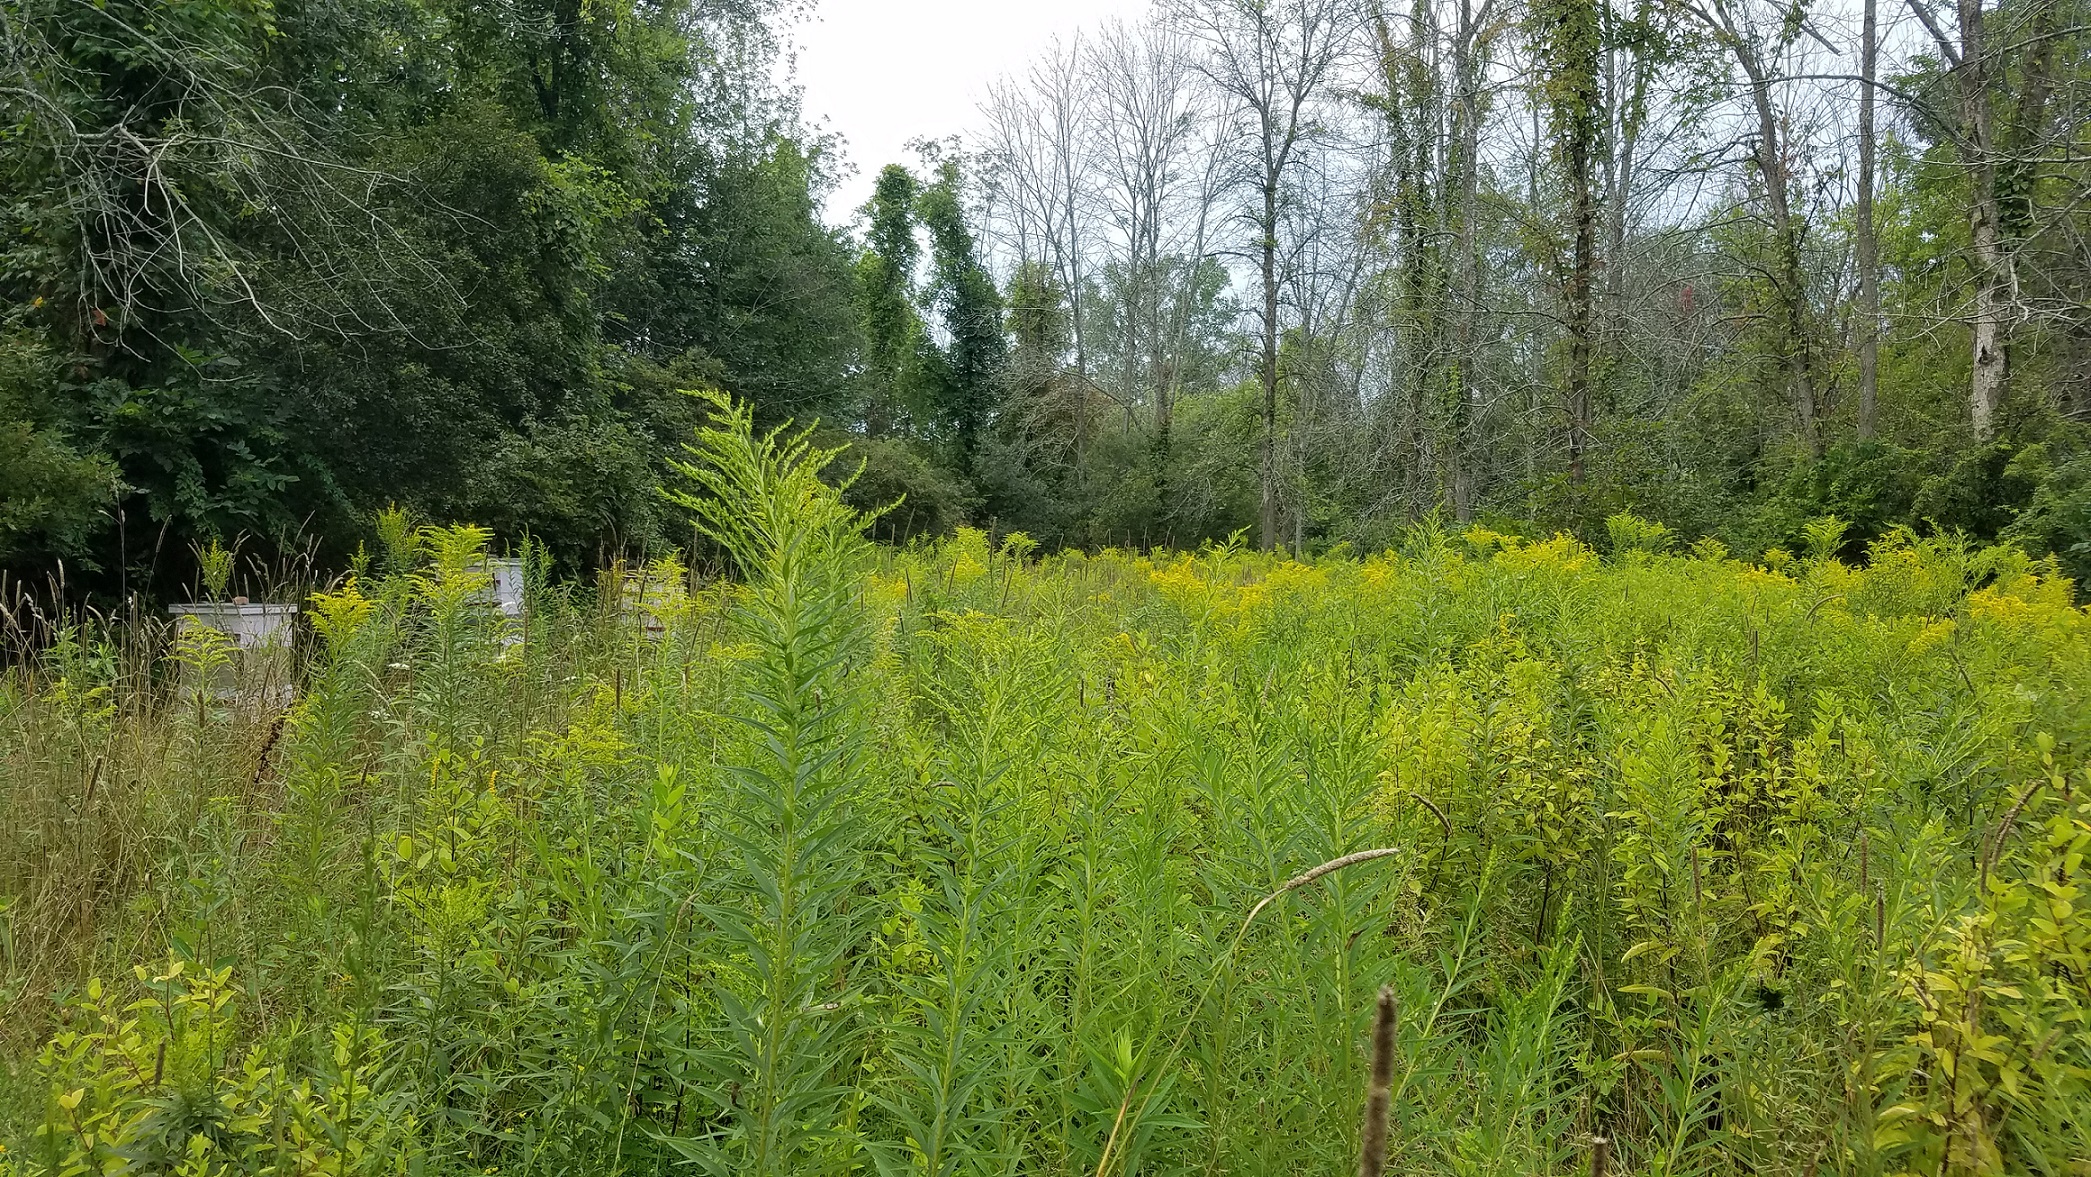 Field of golden rod with bee hives. 